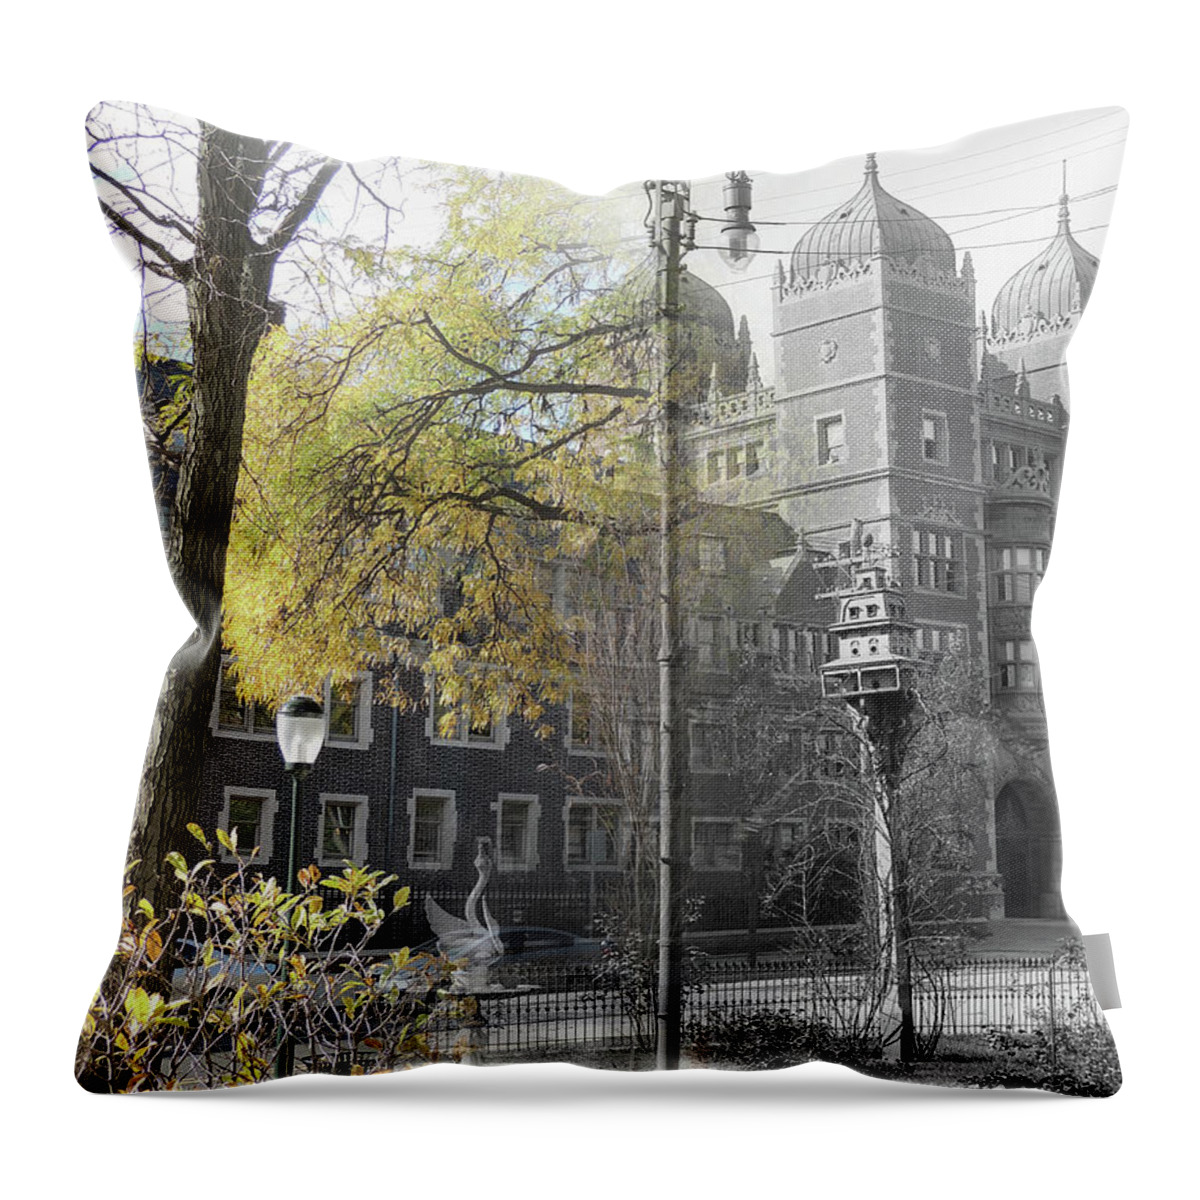  Throw Pillow featuring the photograph Penn Dorms by Eric Nagy